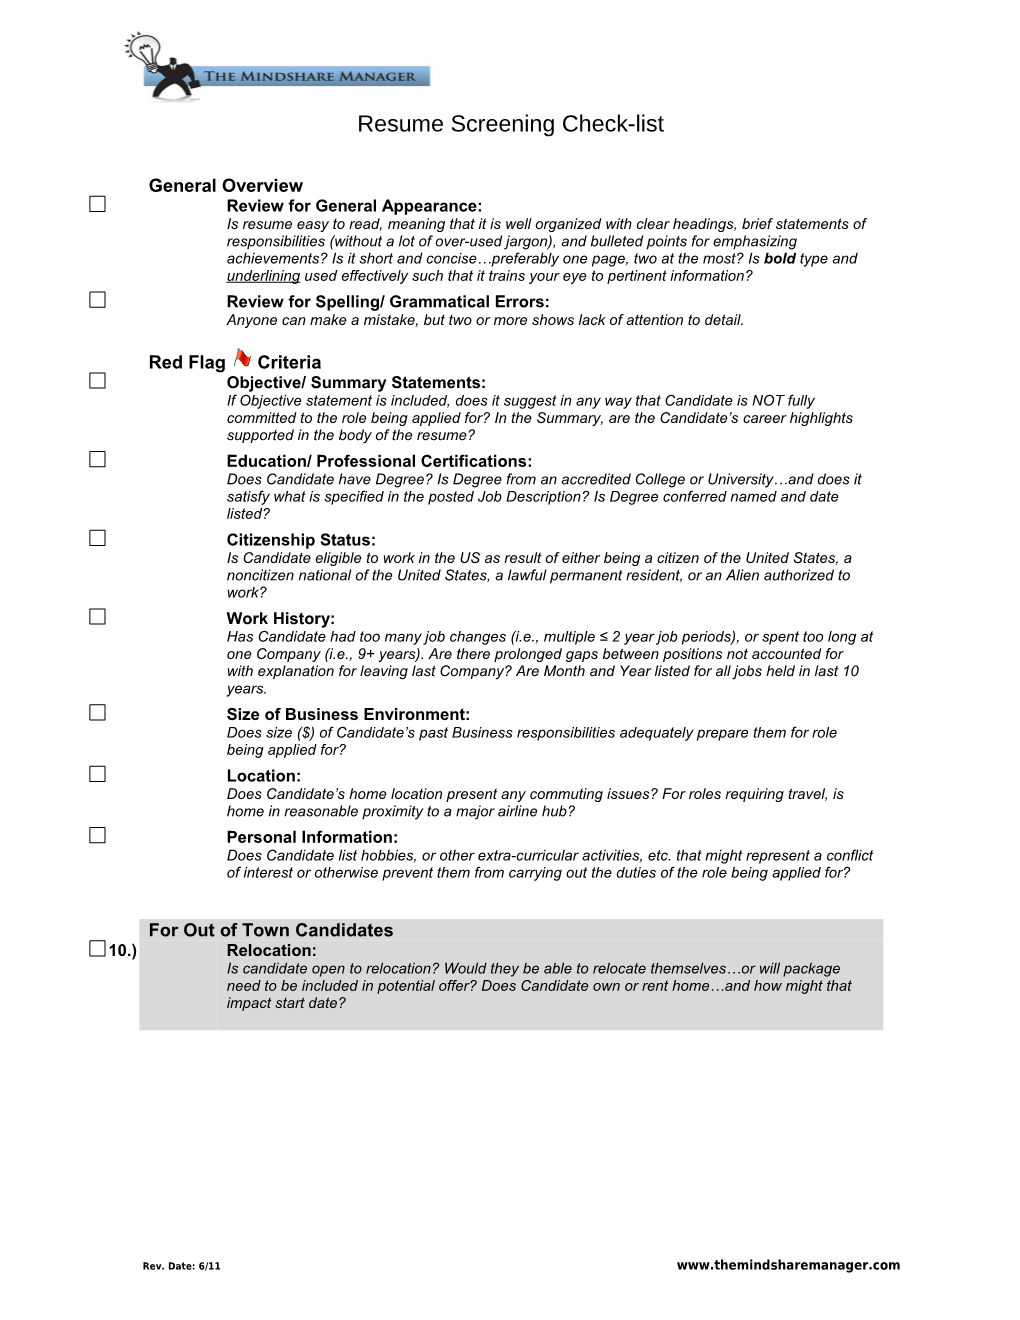 Reference Guide-Sales Position Interview Rating Form